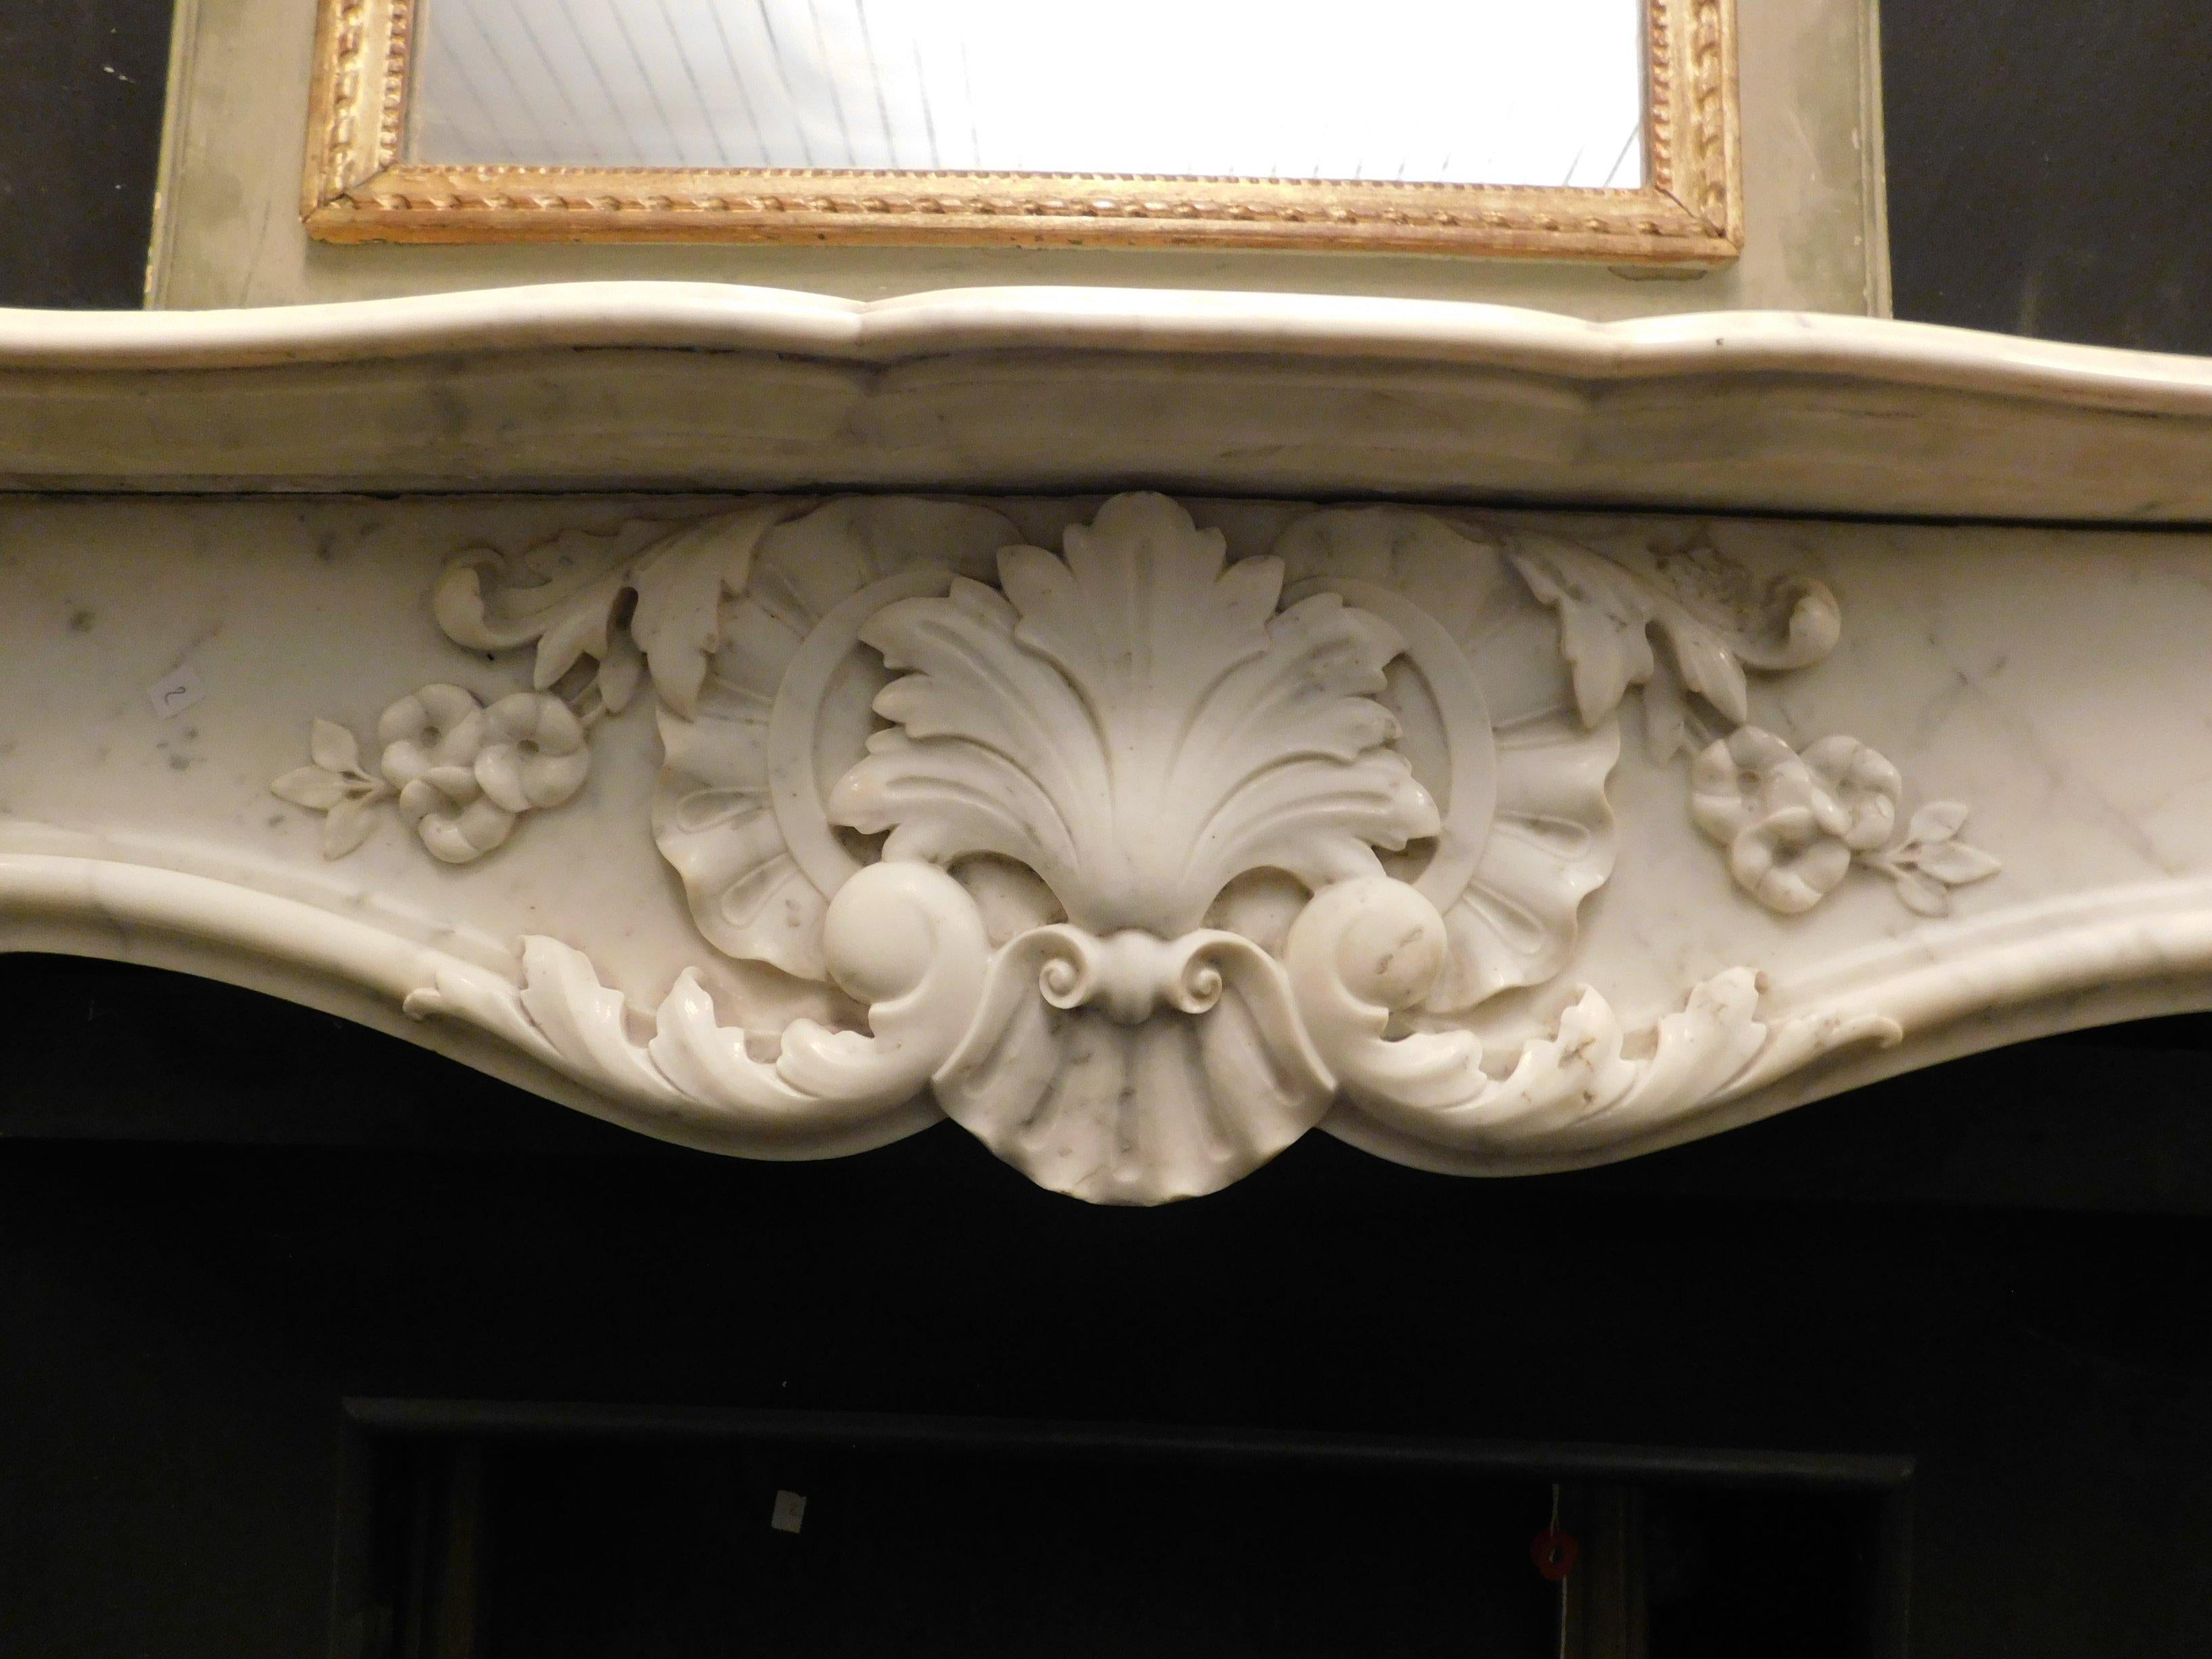 Hand-Carved Antique Fireplace Mantel in White Carrara Marble, France, 1800